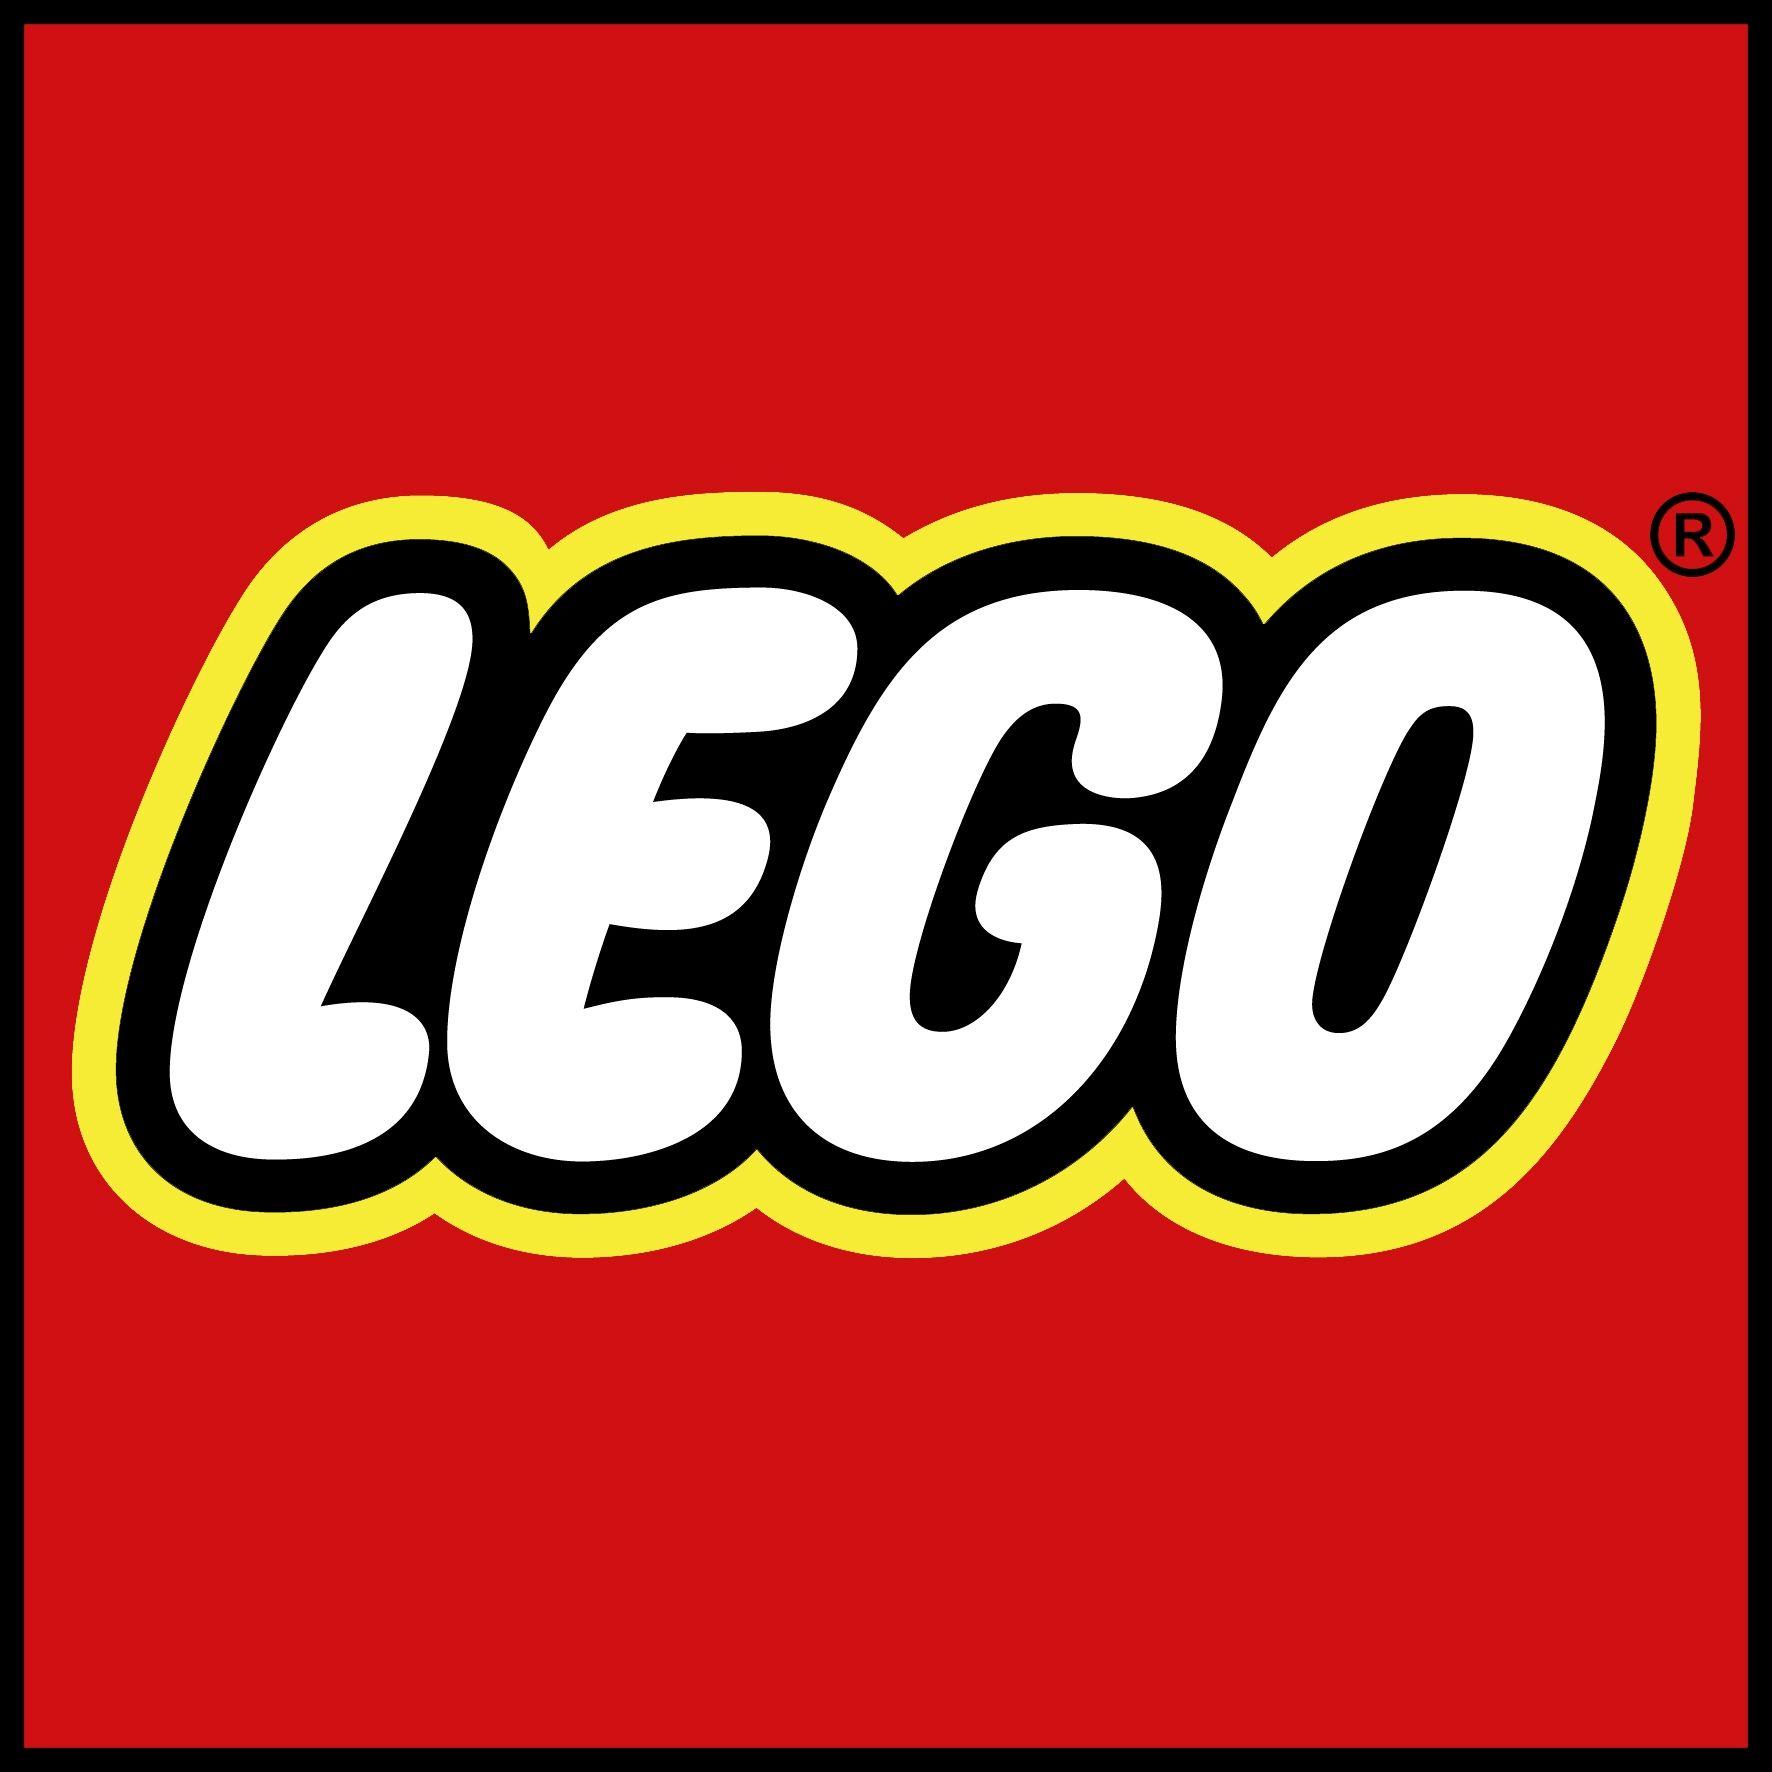 Lego.com Logo - The LEGO Group maintains rank as the 2nd most highly regarded